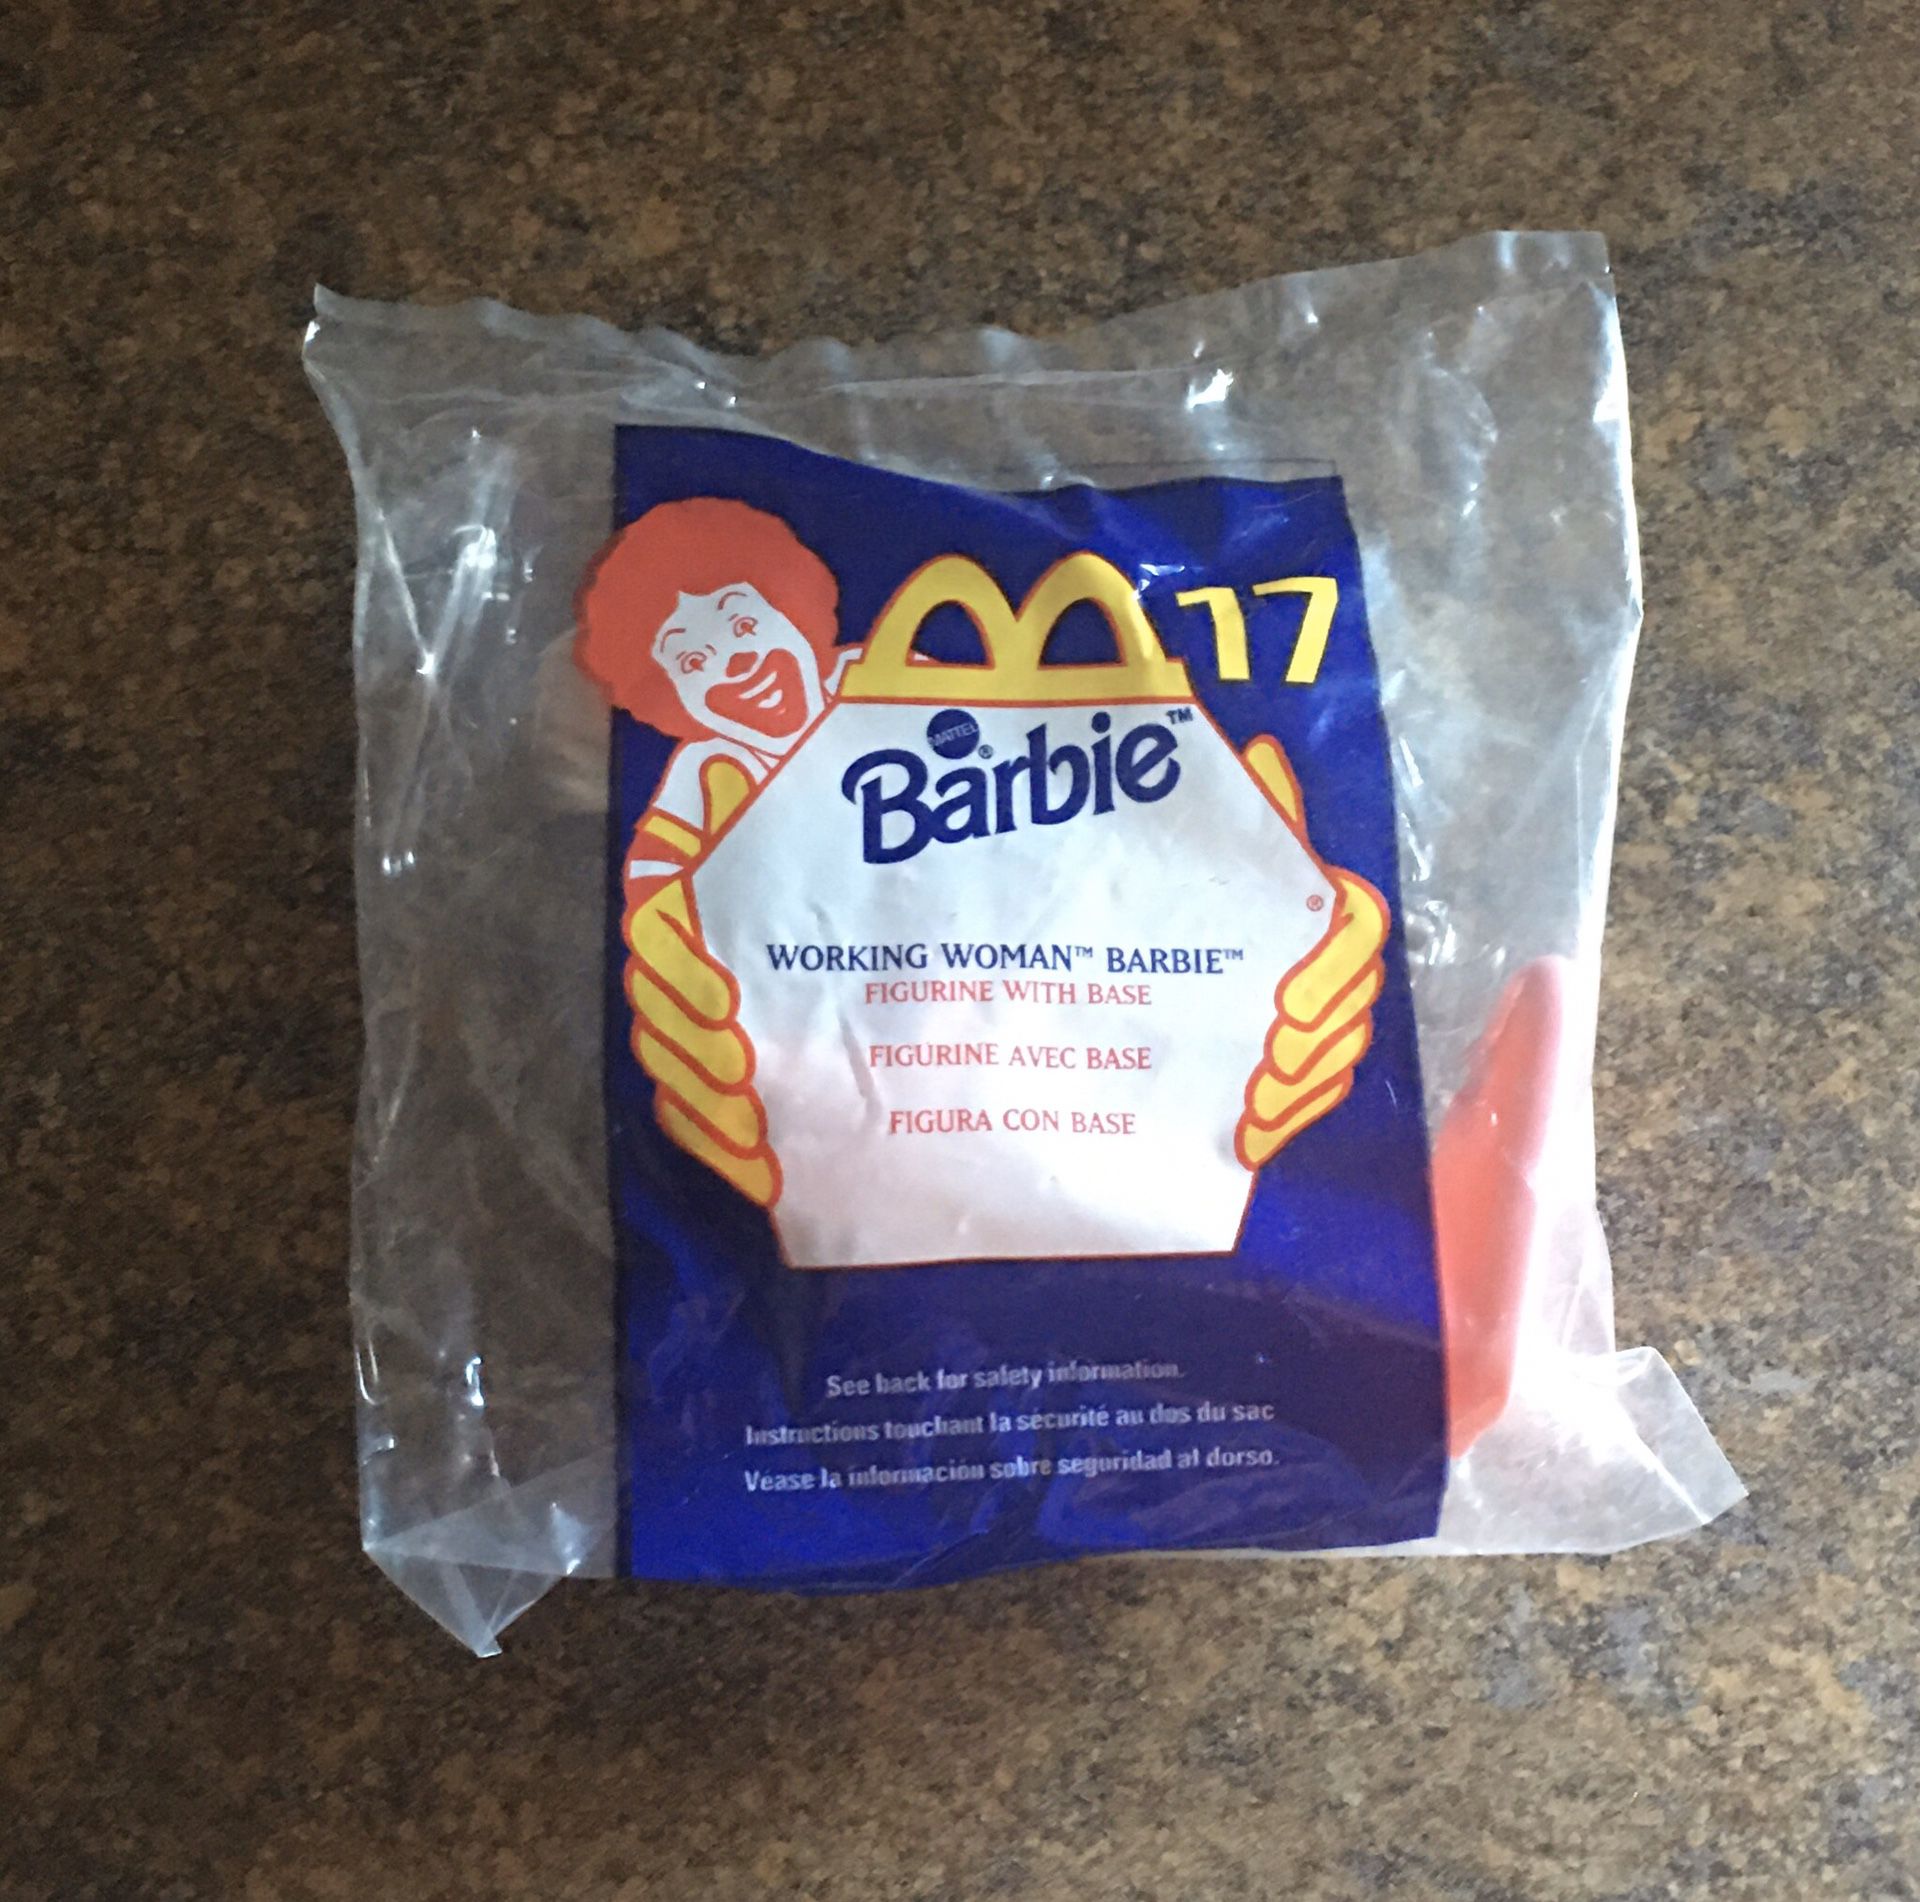 Vintage McDonald’s Happy Meal 1999 #17 Barbie Working Woman Barbie Figurine with Base - Brand New/Sealed